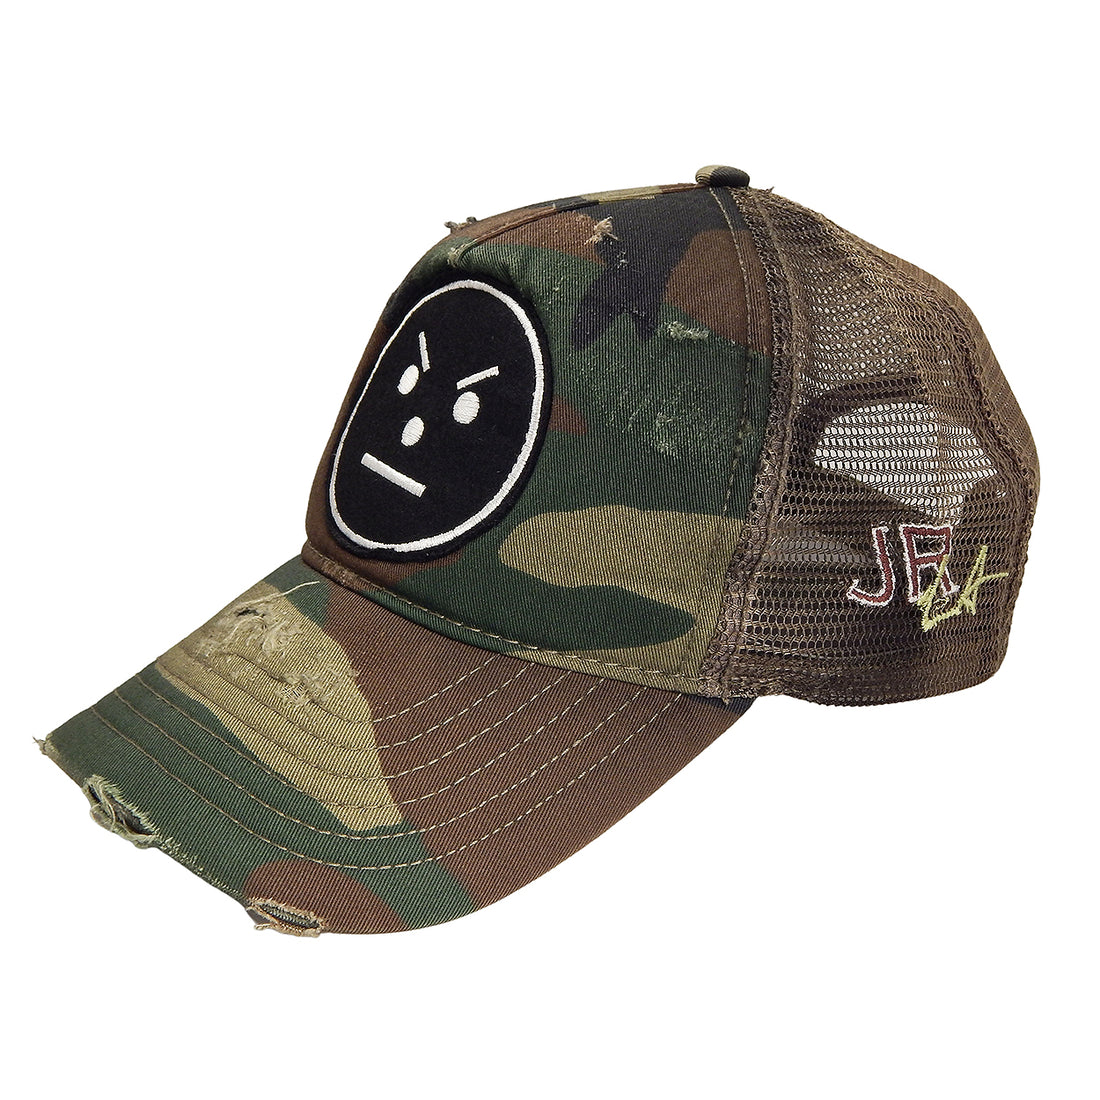 J. RANSOM Collection - "SERIOUS SNOWMAN" in Green Camouflage Trucker Hat